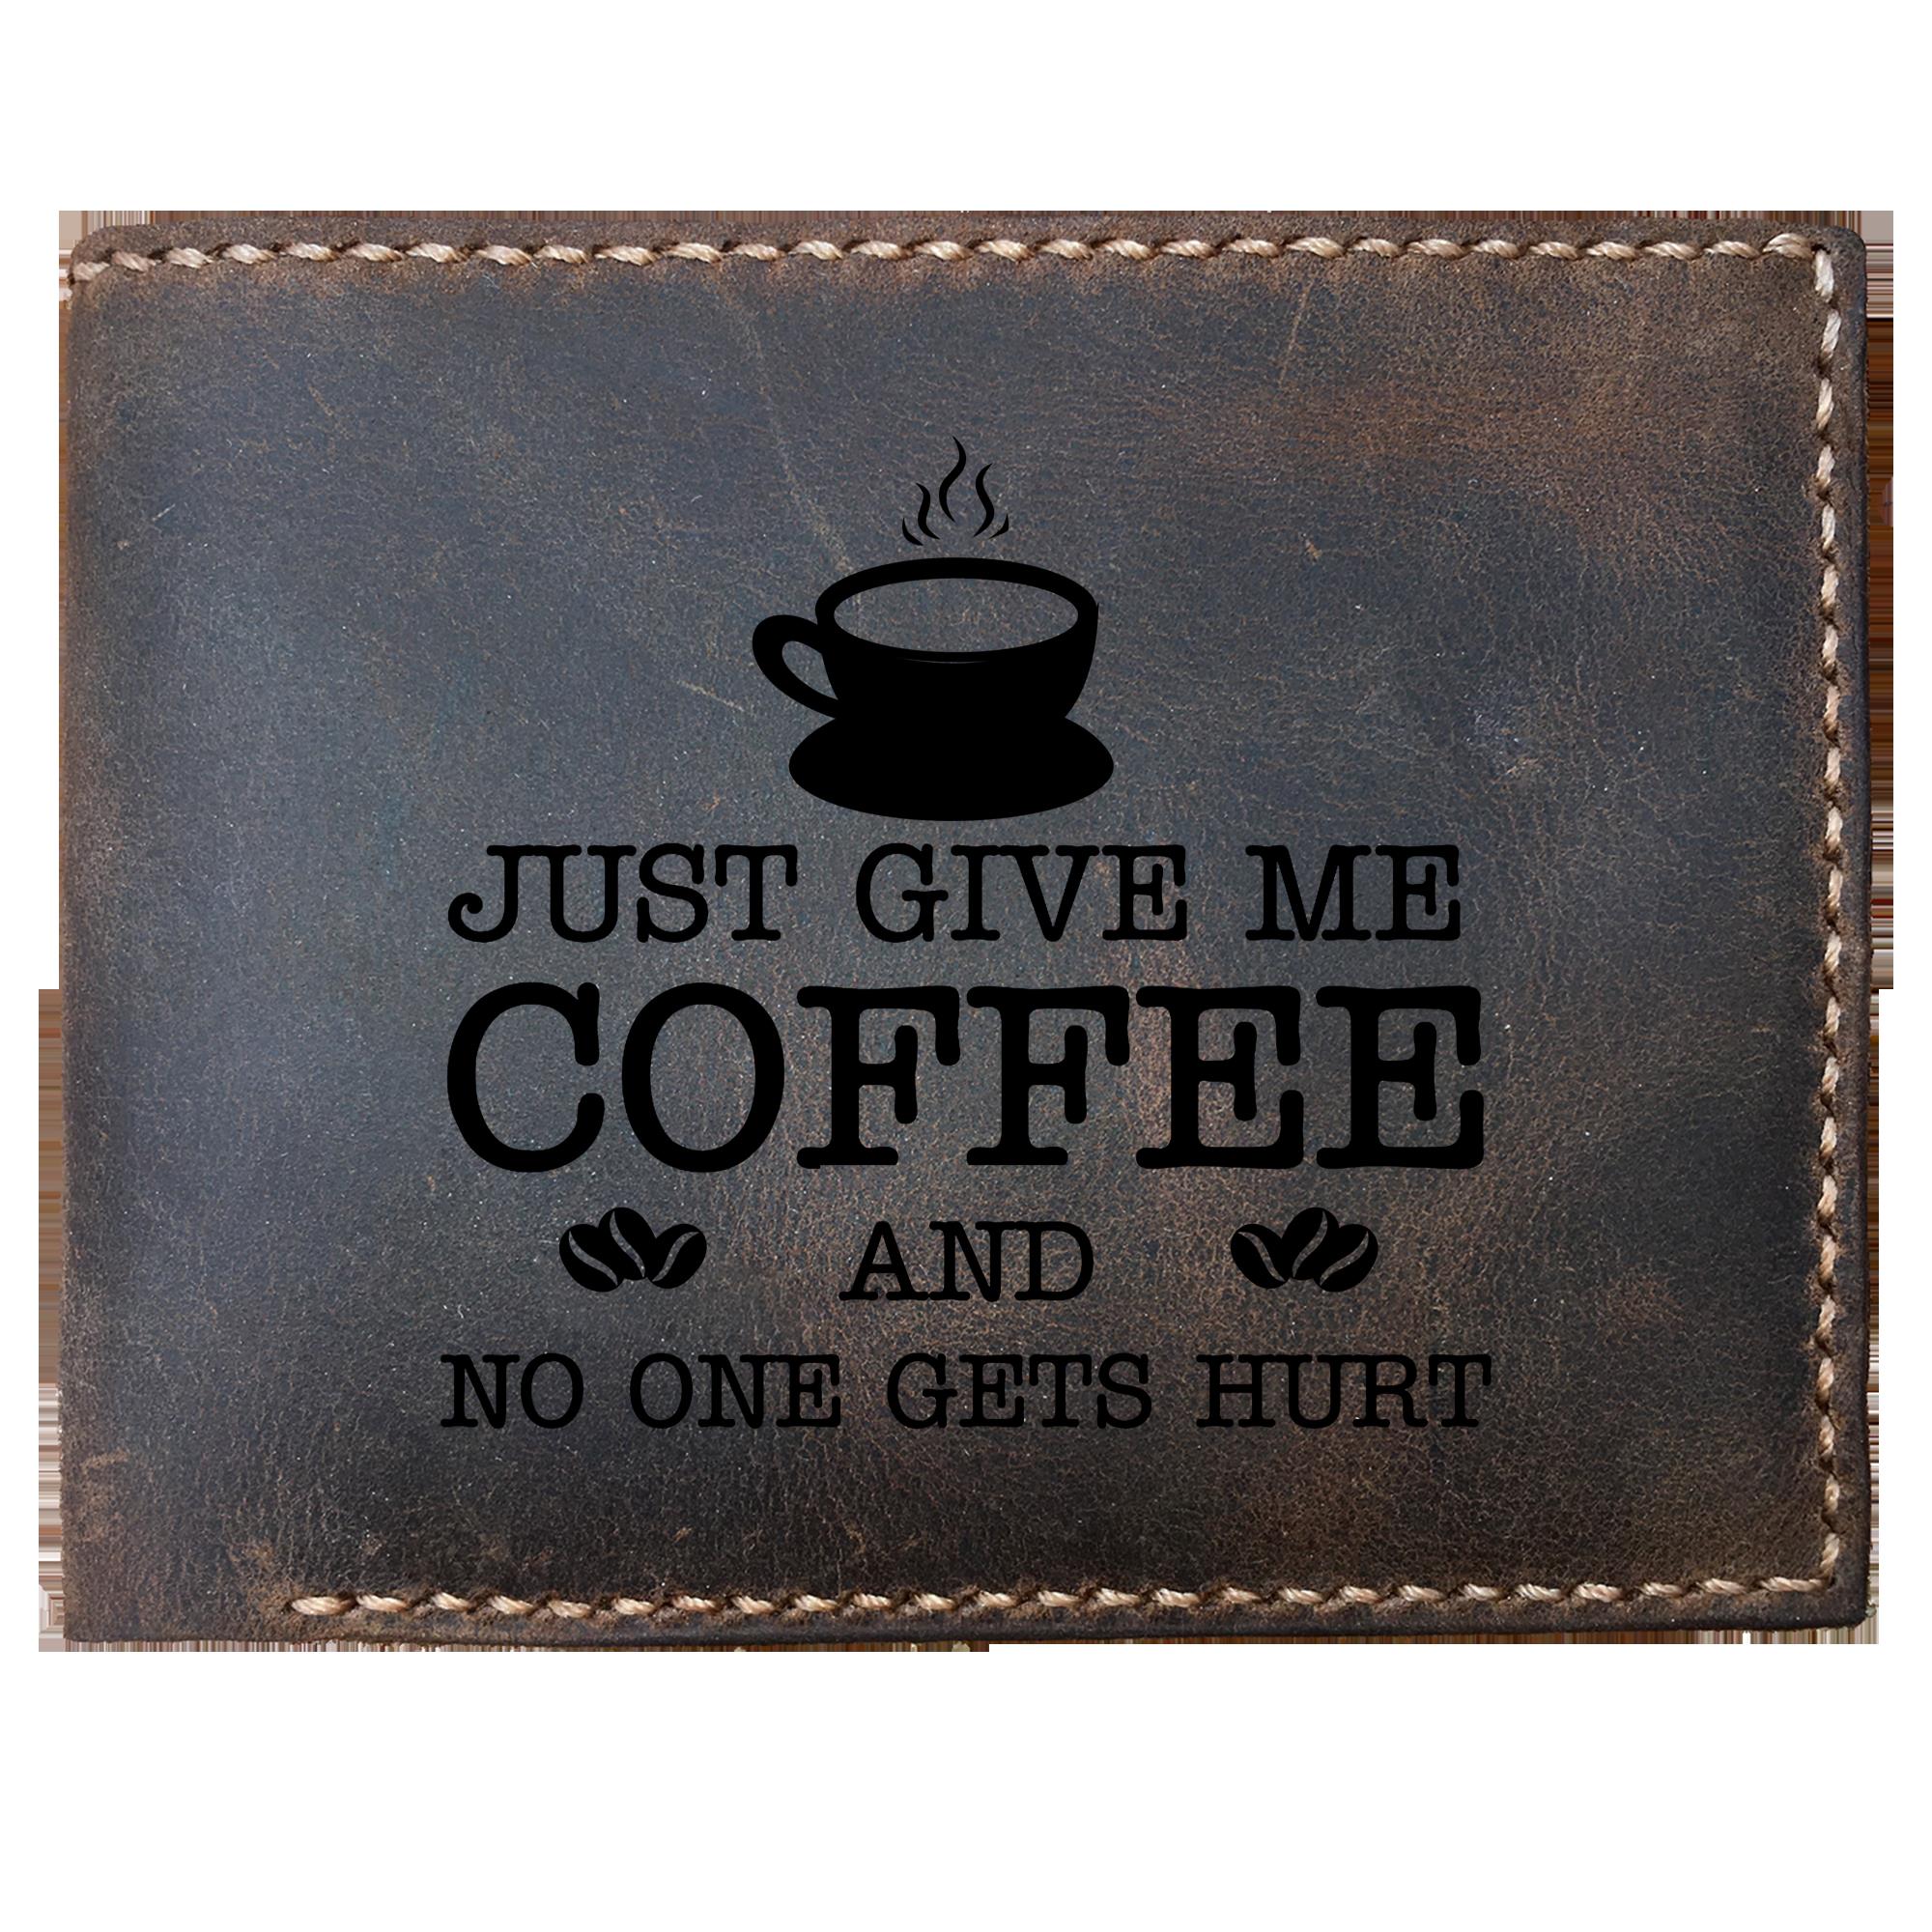 Skitongifts Funny Custom Laser Engraved Bifold Leather Wallet For Men, Just Give Me Coffee And No One Gets Hurt Funny